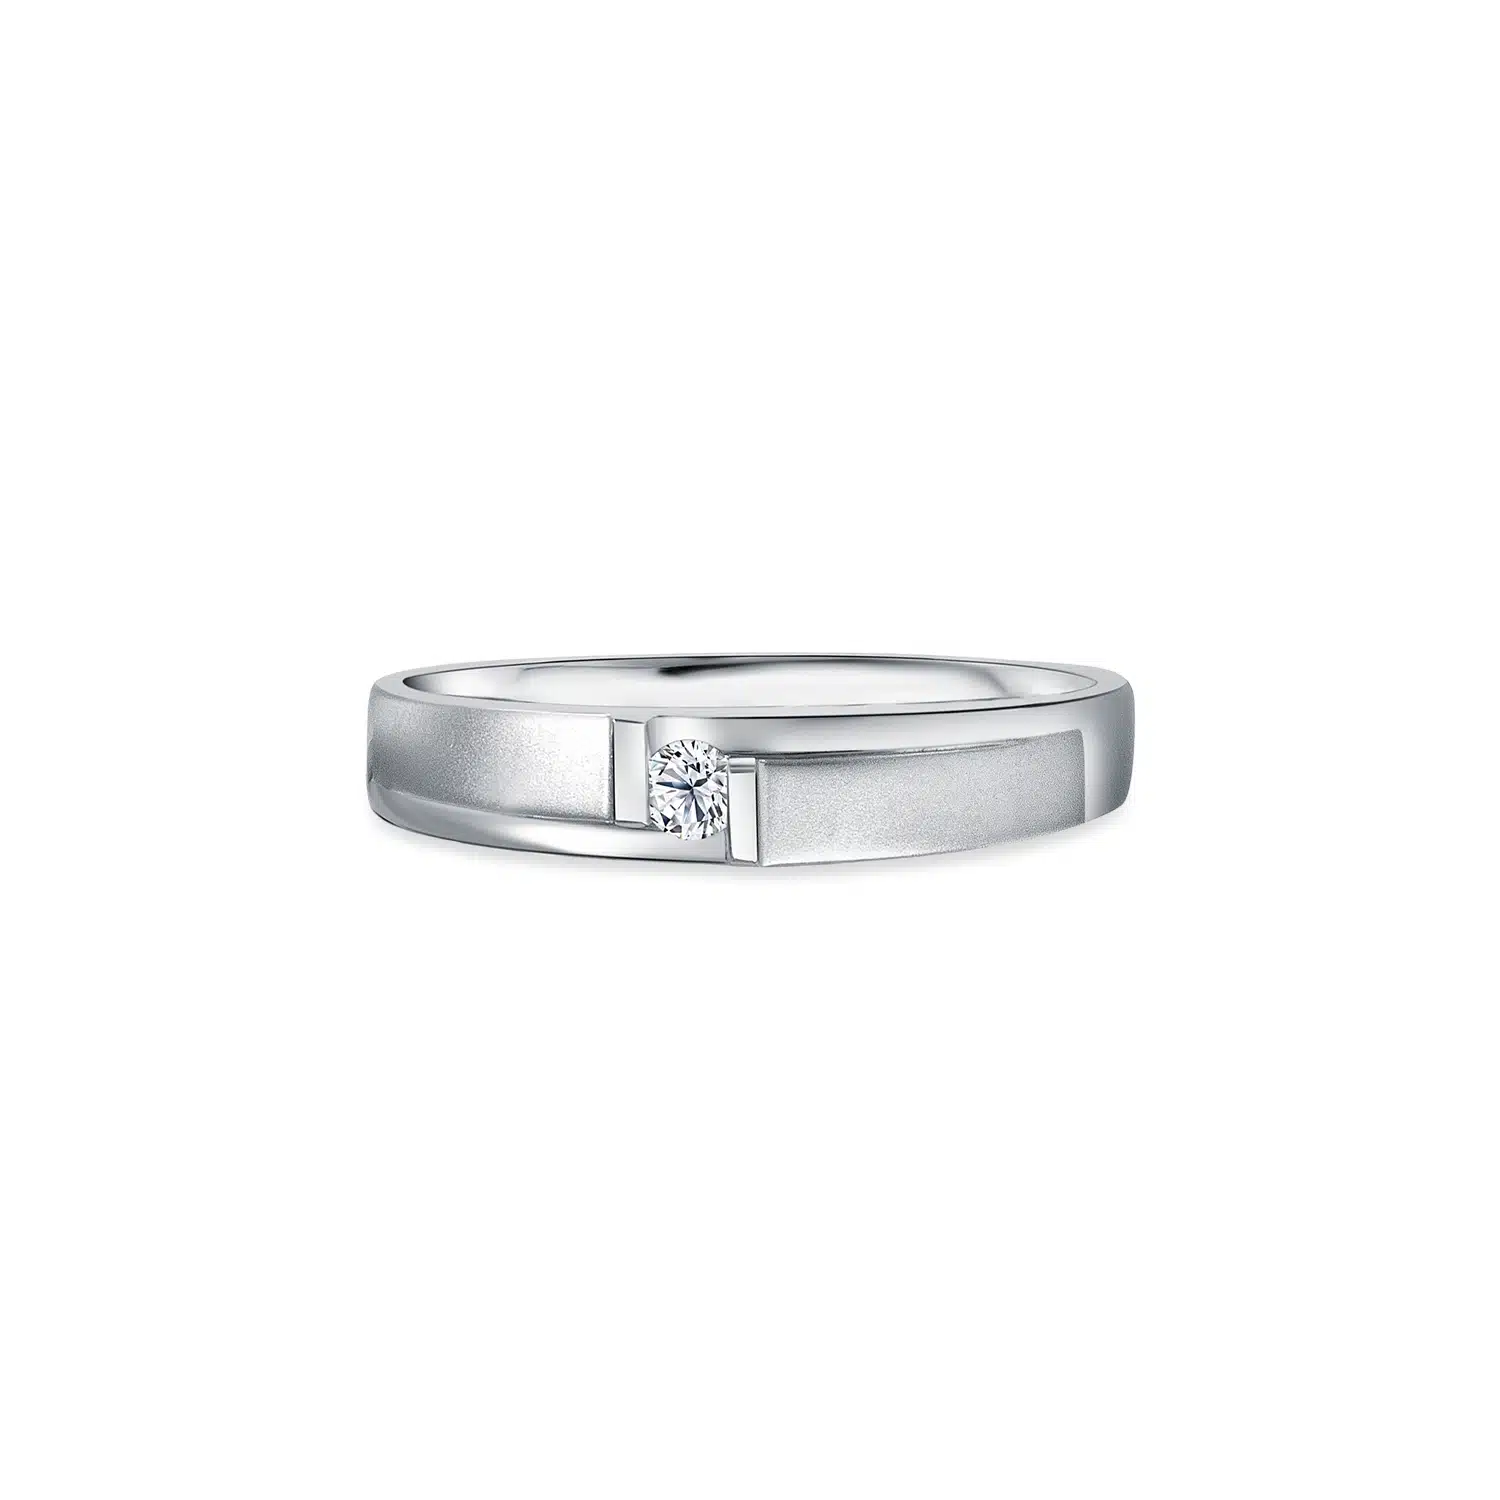 MOMENTO MY ONE TRUE LOVE celebrate love for a lifetime in 18k white gold totaling in 0.05 carat weight WEDDING BAND